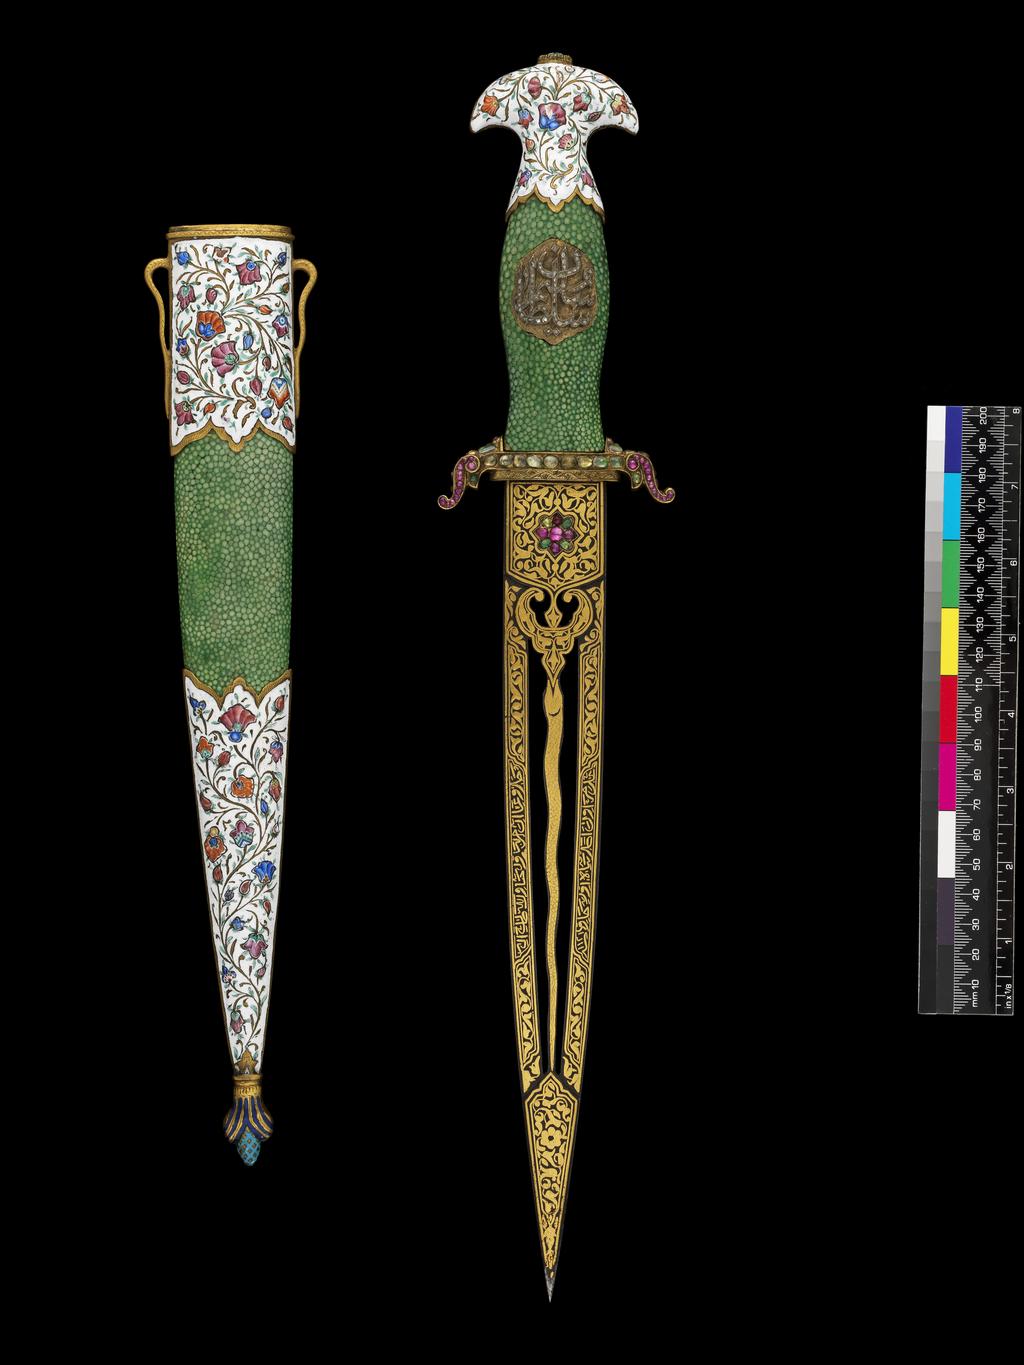 An image of Dagger and Scabbard (khanjar). The blade is straight and double edged, fretted with two slots at either side of a medial serpent, and around a lotus bud. The blade is set with four emeralds and five rubies at either side of the forte, and decorated overall with floral panels and inscriptions in thick gold koftgari. The blade bears the date 'sanat 1121'. The hilt comprises a bulbous grip in shagreen, with a medallion of small diamonds in a gilt setting at the centre reading ‘Sultan Sa’id’. The guard has small forward curved quillons set with various stones and gilded, and a pommel beaked at either side, enamelled in blue, red, pink and yellow in a white ground. The scabbard is of wood covered with shagreen, with large top locket and chape decorated in the same enamel, the chape with a large finial gilt with dark blue and turquoise enamel. Length (whole) 410 mm, width (blade) 270 mm, scabbard 310 mm, weight 280g. Blade 18th Century (1709-10), Turkish hilt & scabbard 19th Century. Turkish, Persian.